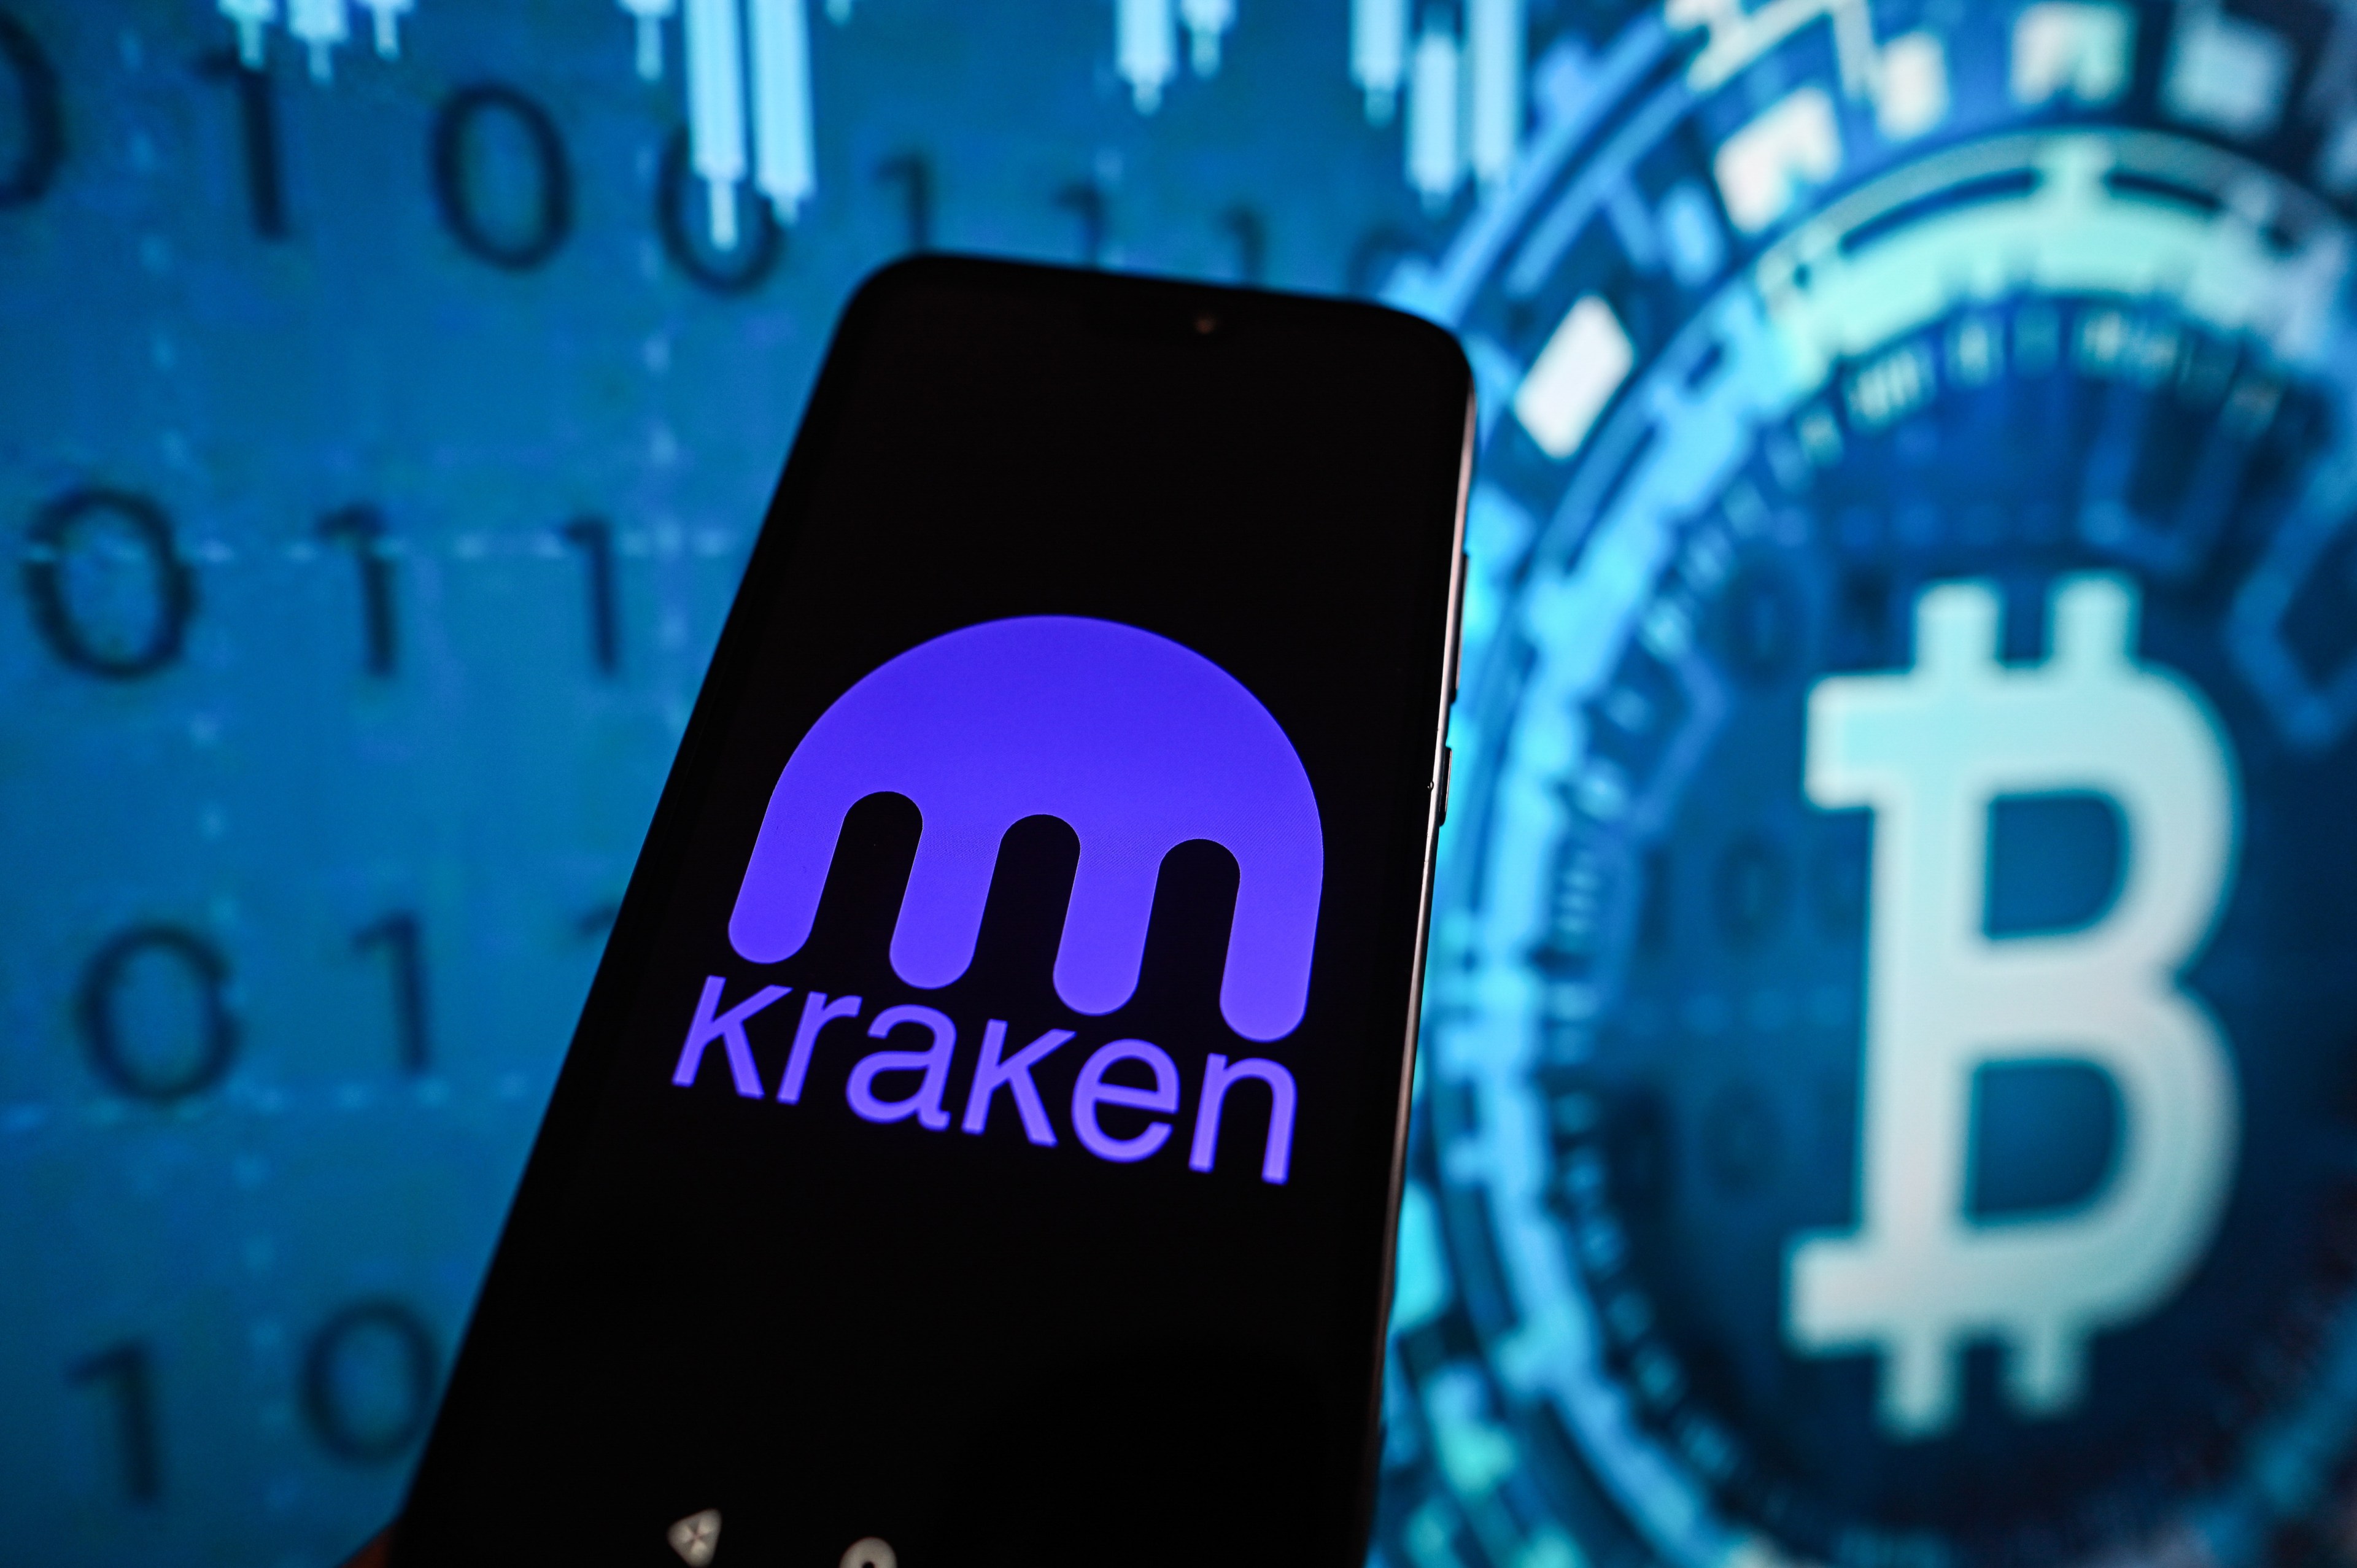 A Kraken logo displayed on a smartphone with a Bitcoin logo in the background.